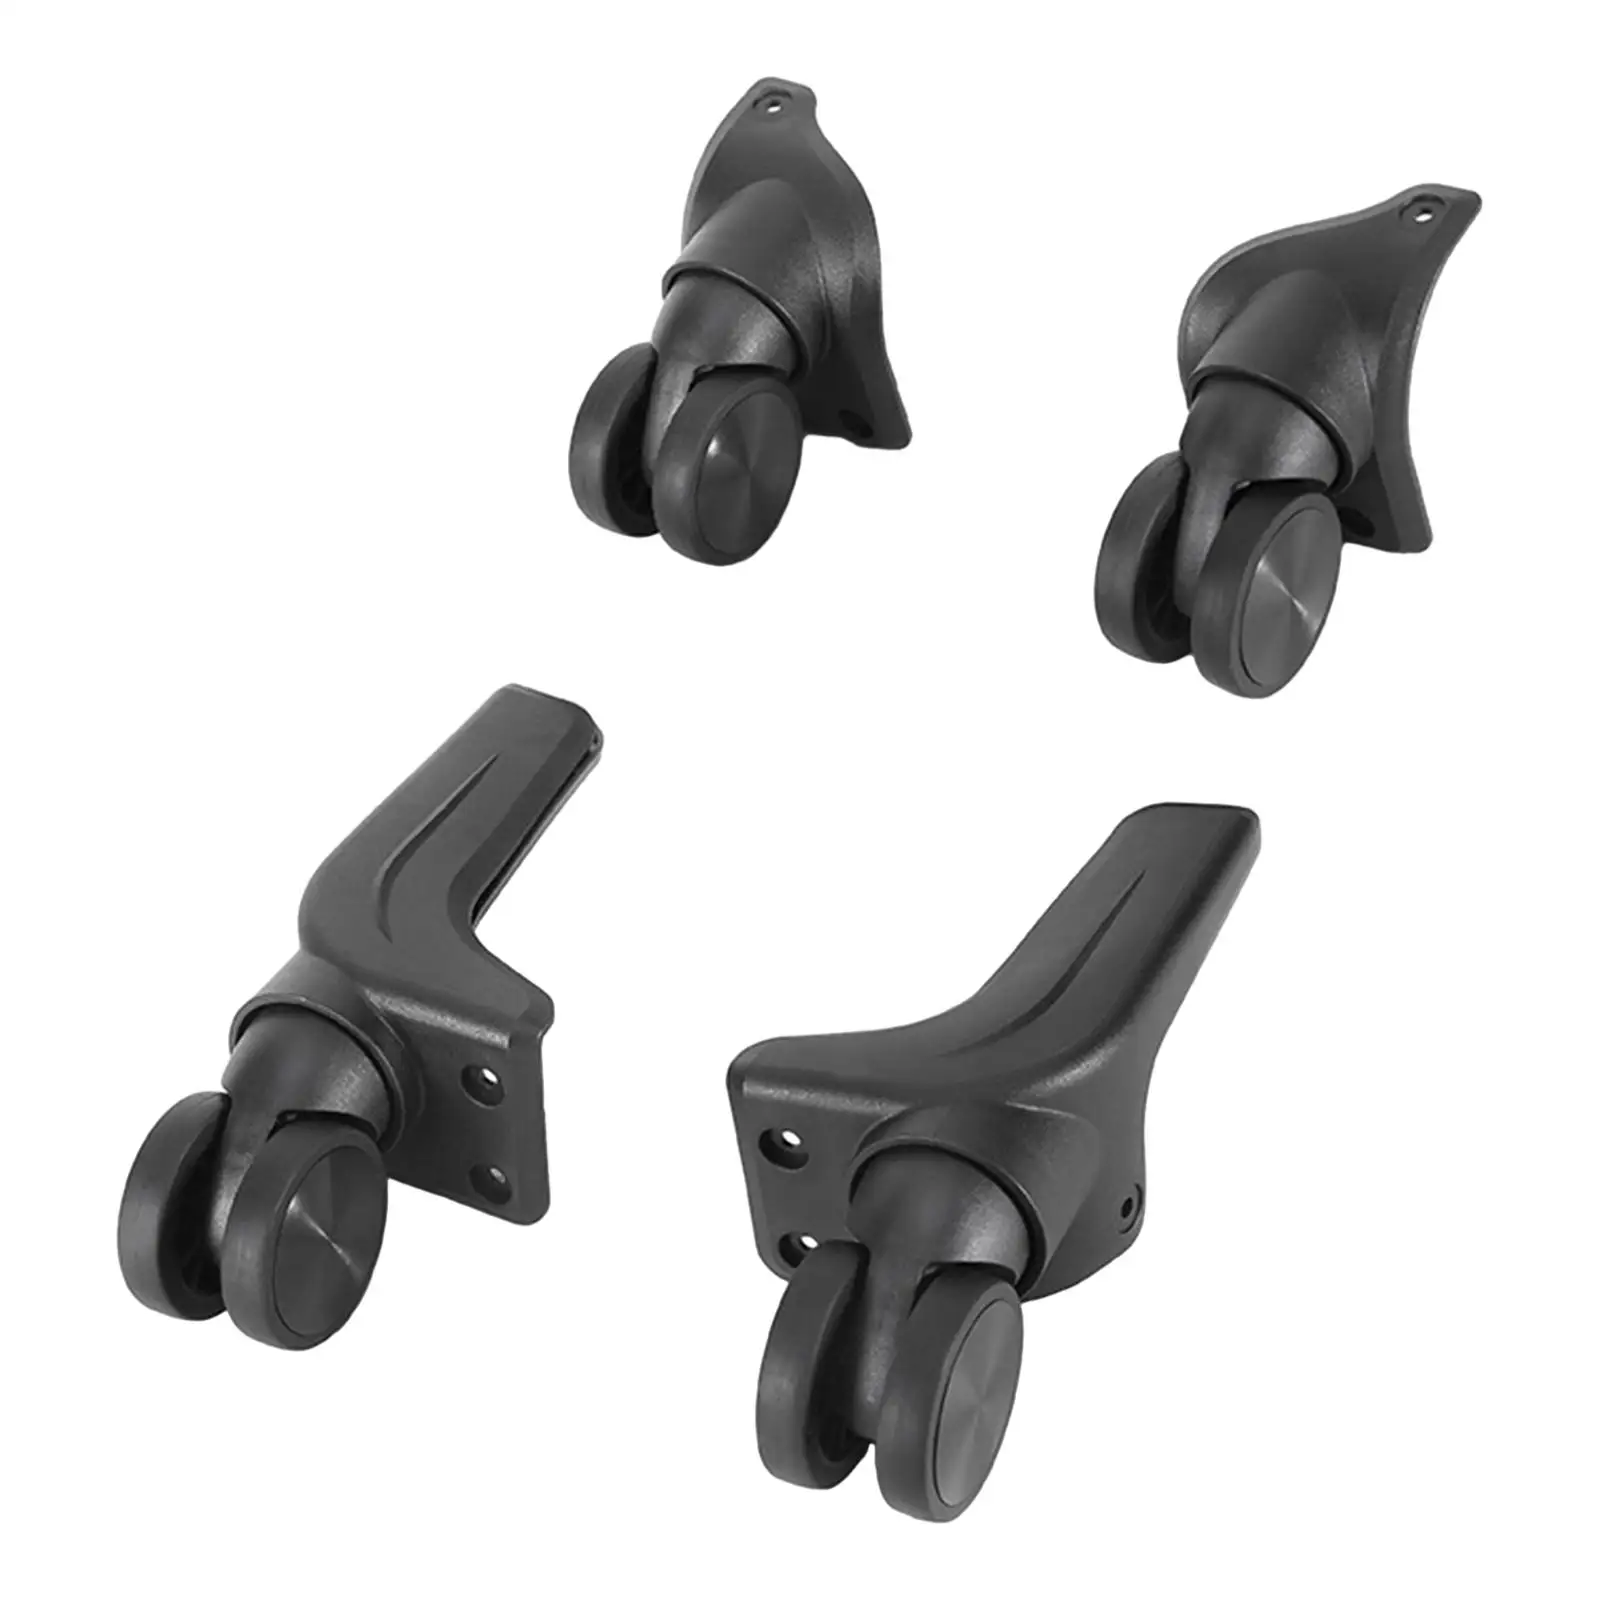 4 Pieces Replacement Luggage Suitcase Wheels Black Flexible Luggage Accessories Swivel Wheels Replacement Suitcase Caster Wheels